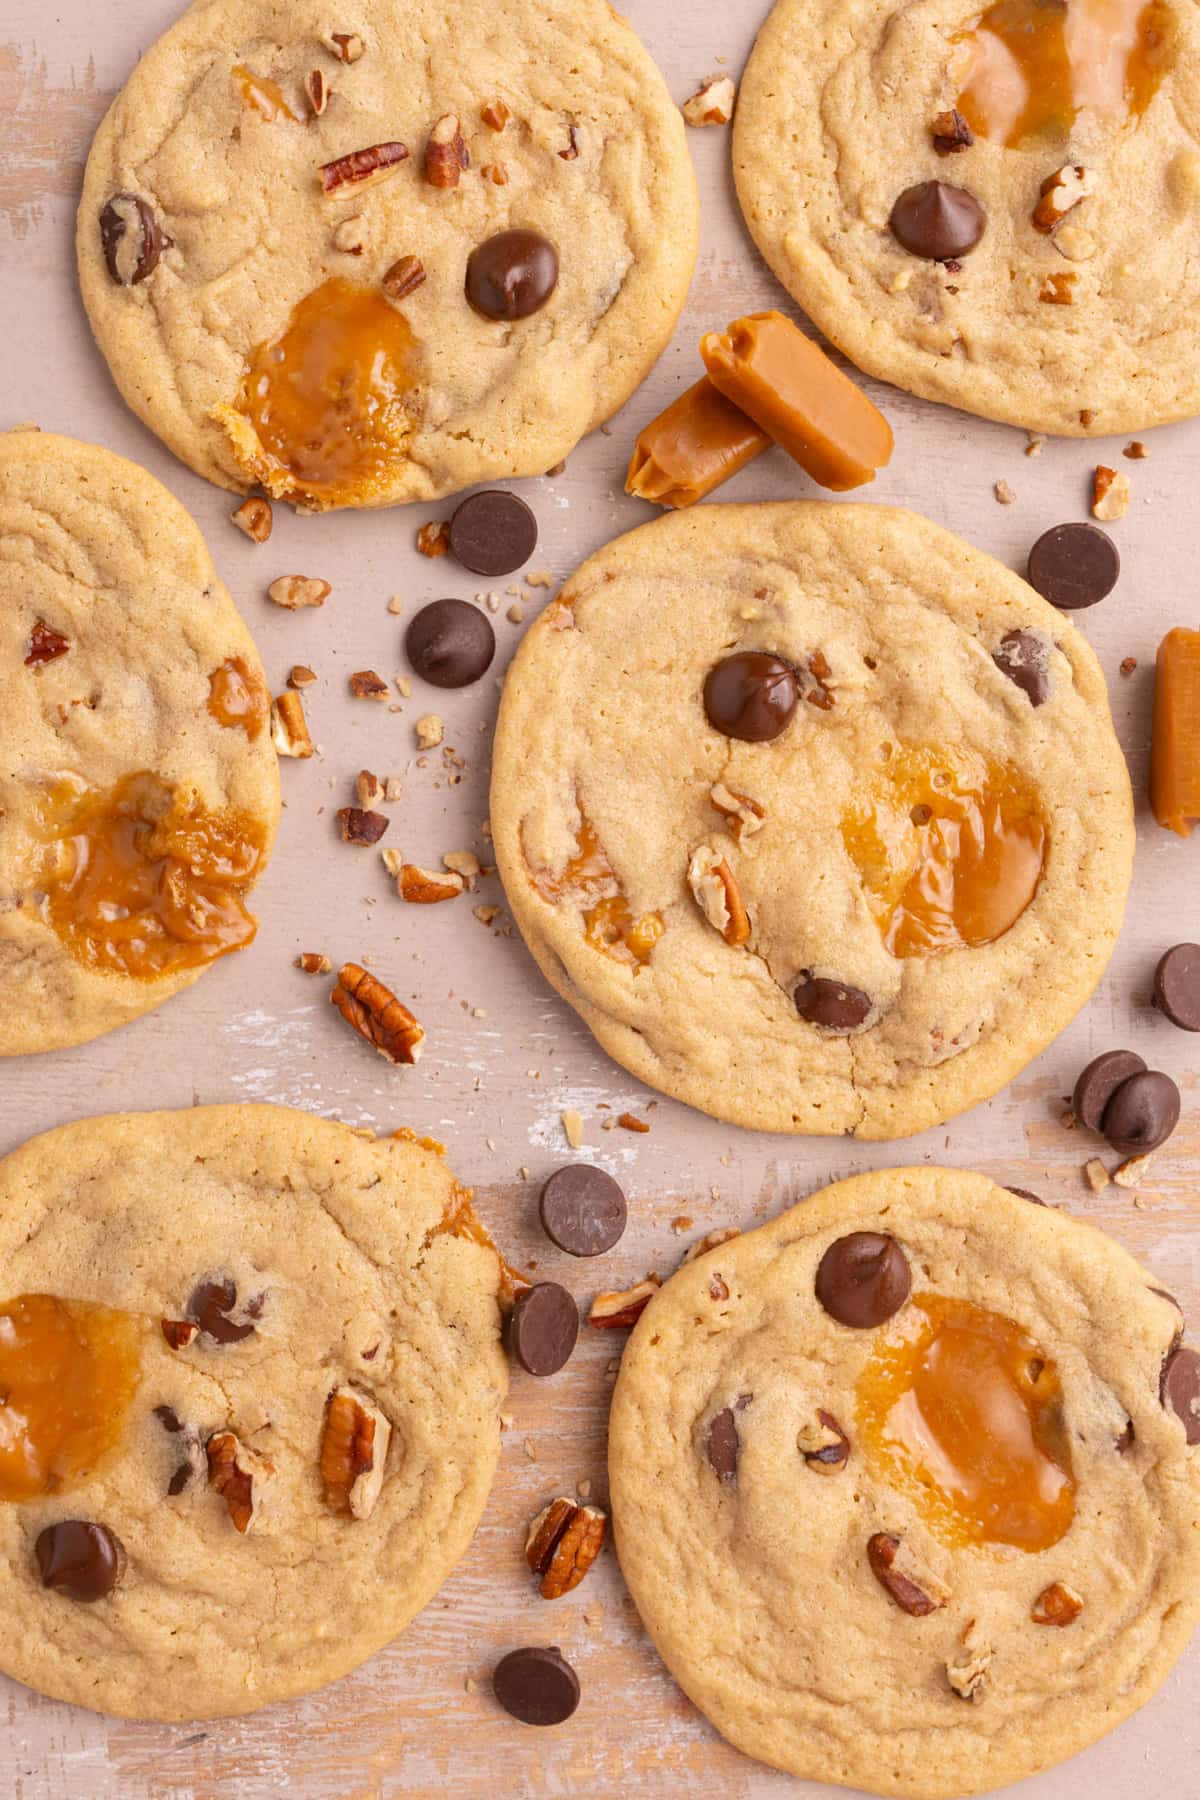 Overhead image of cookies with pecans, caramel, and chocolate chips